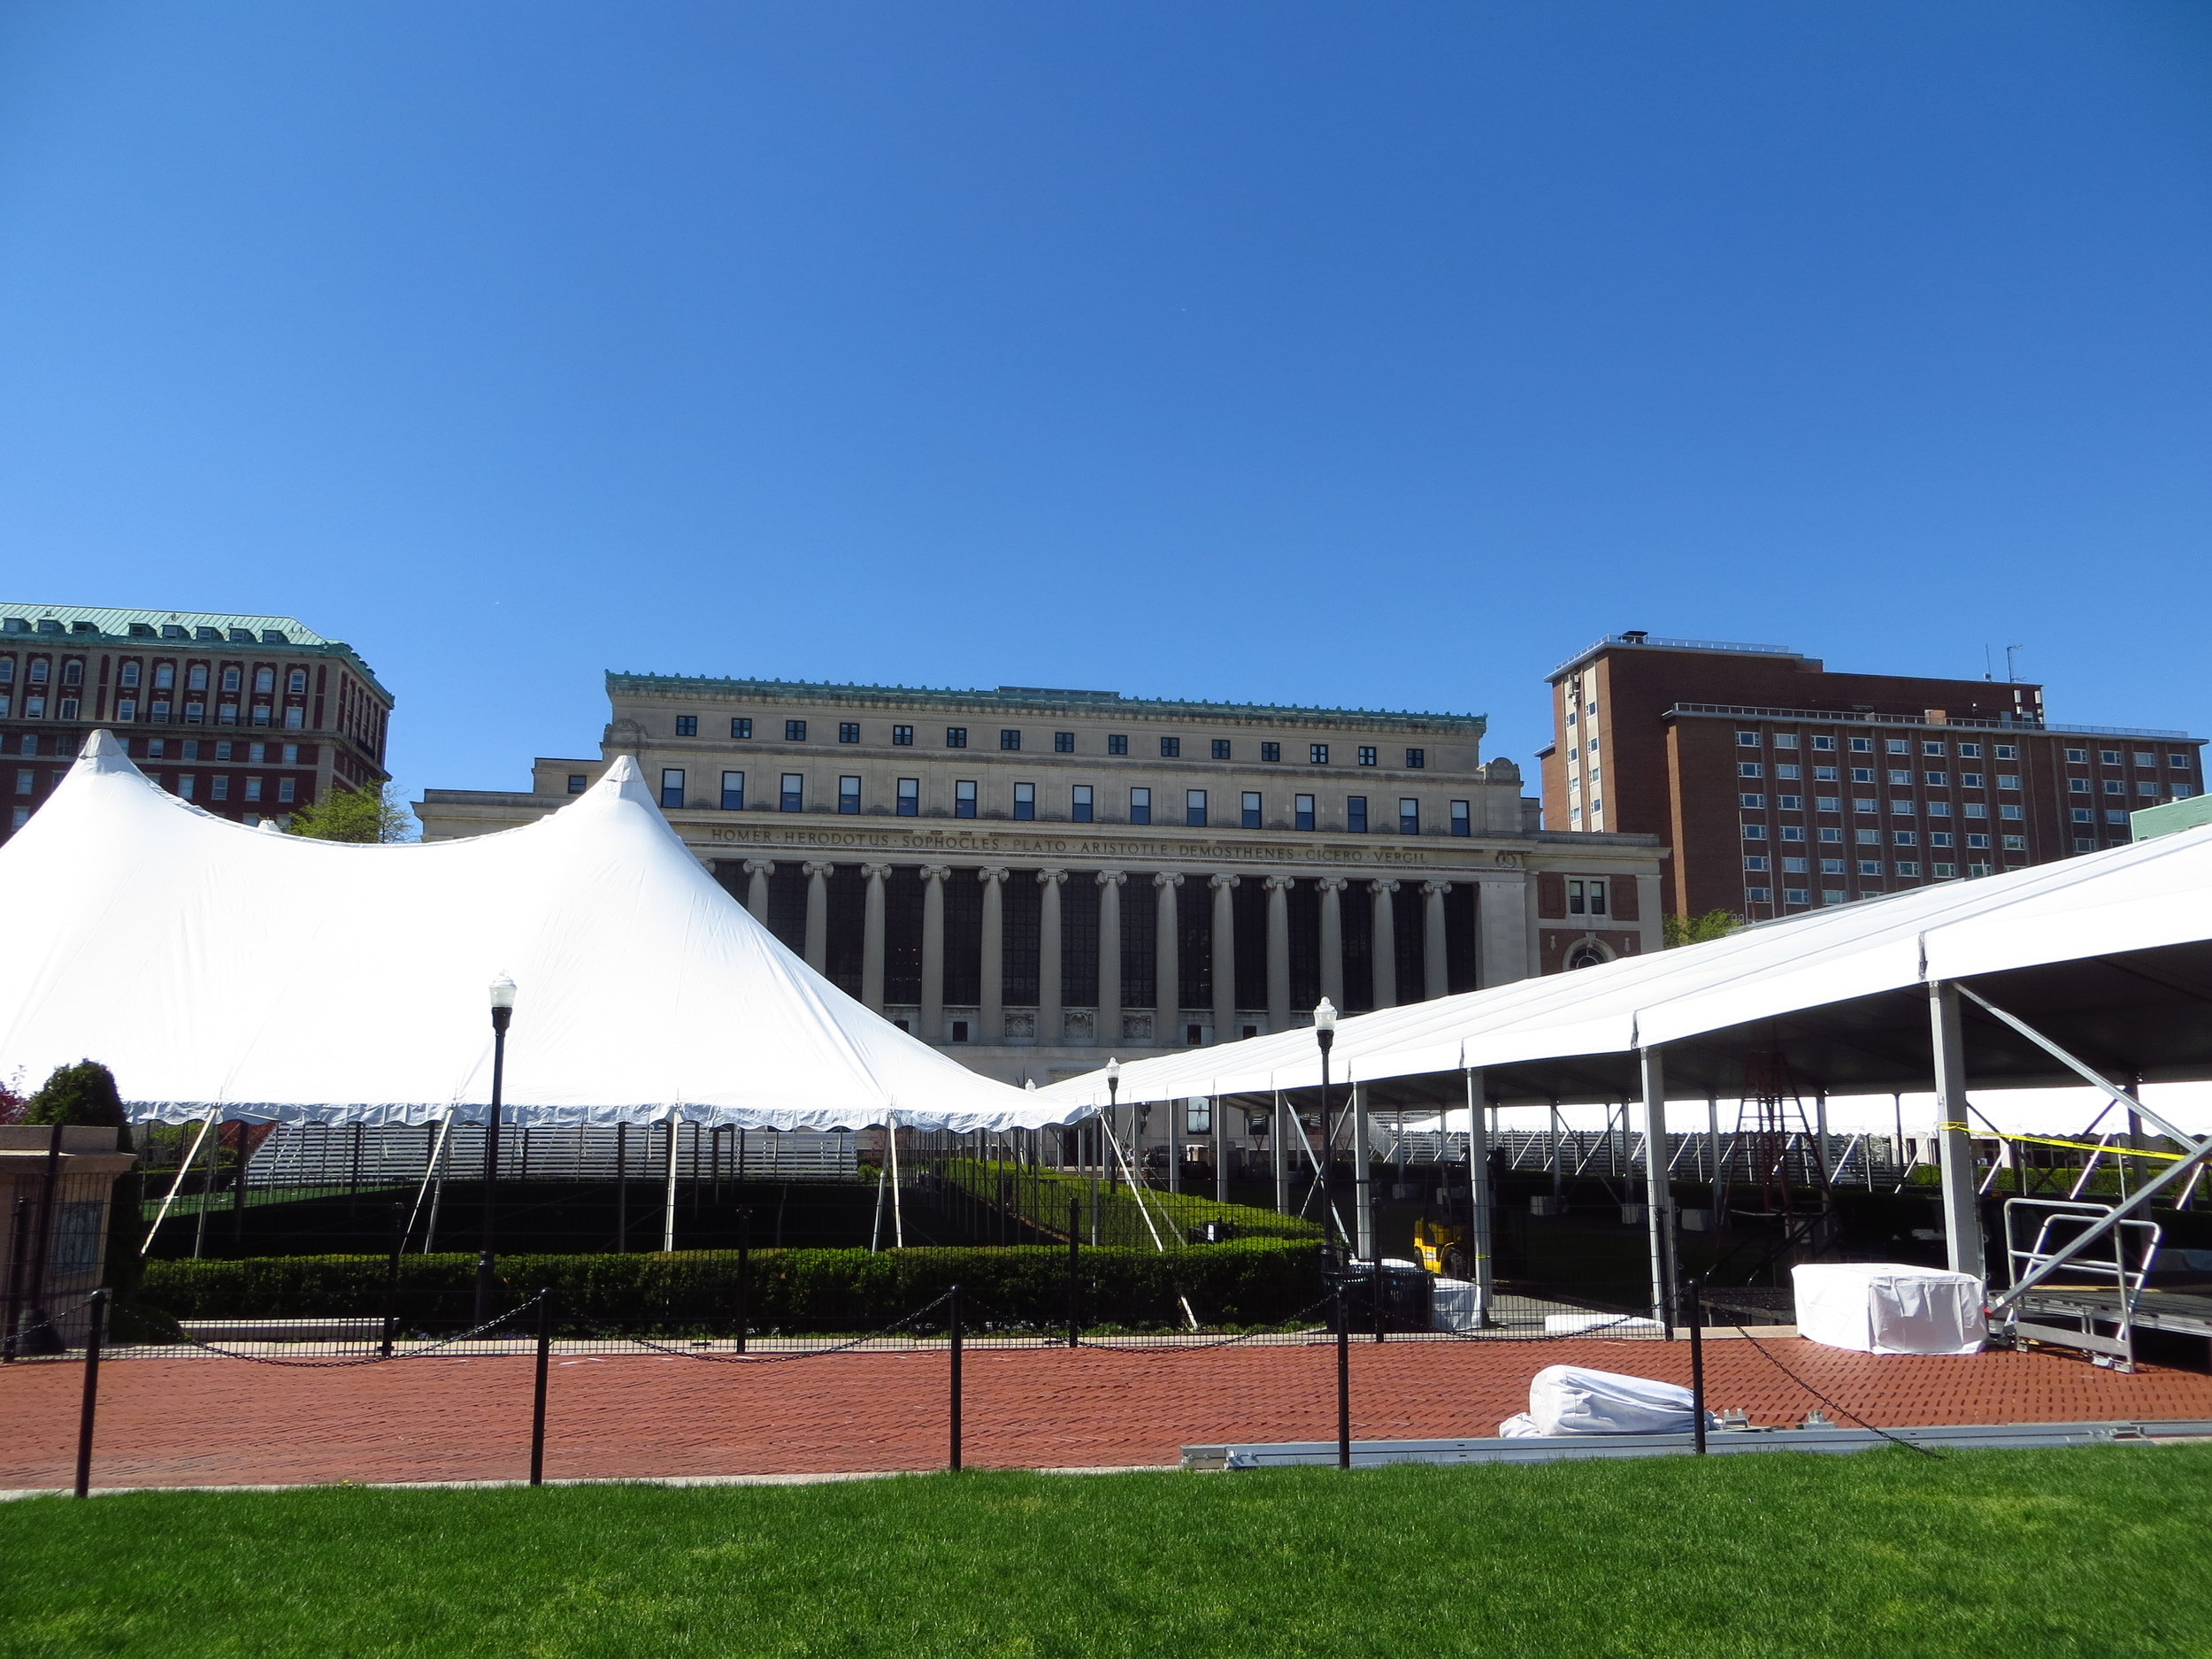 Columbia University (set up for commencement)